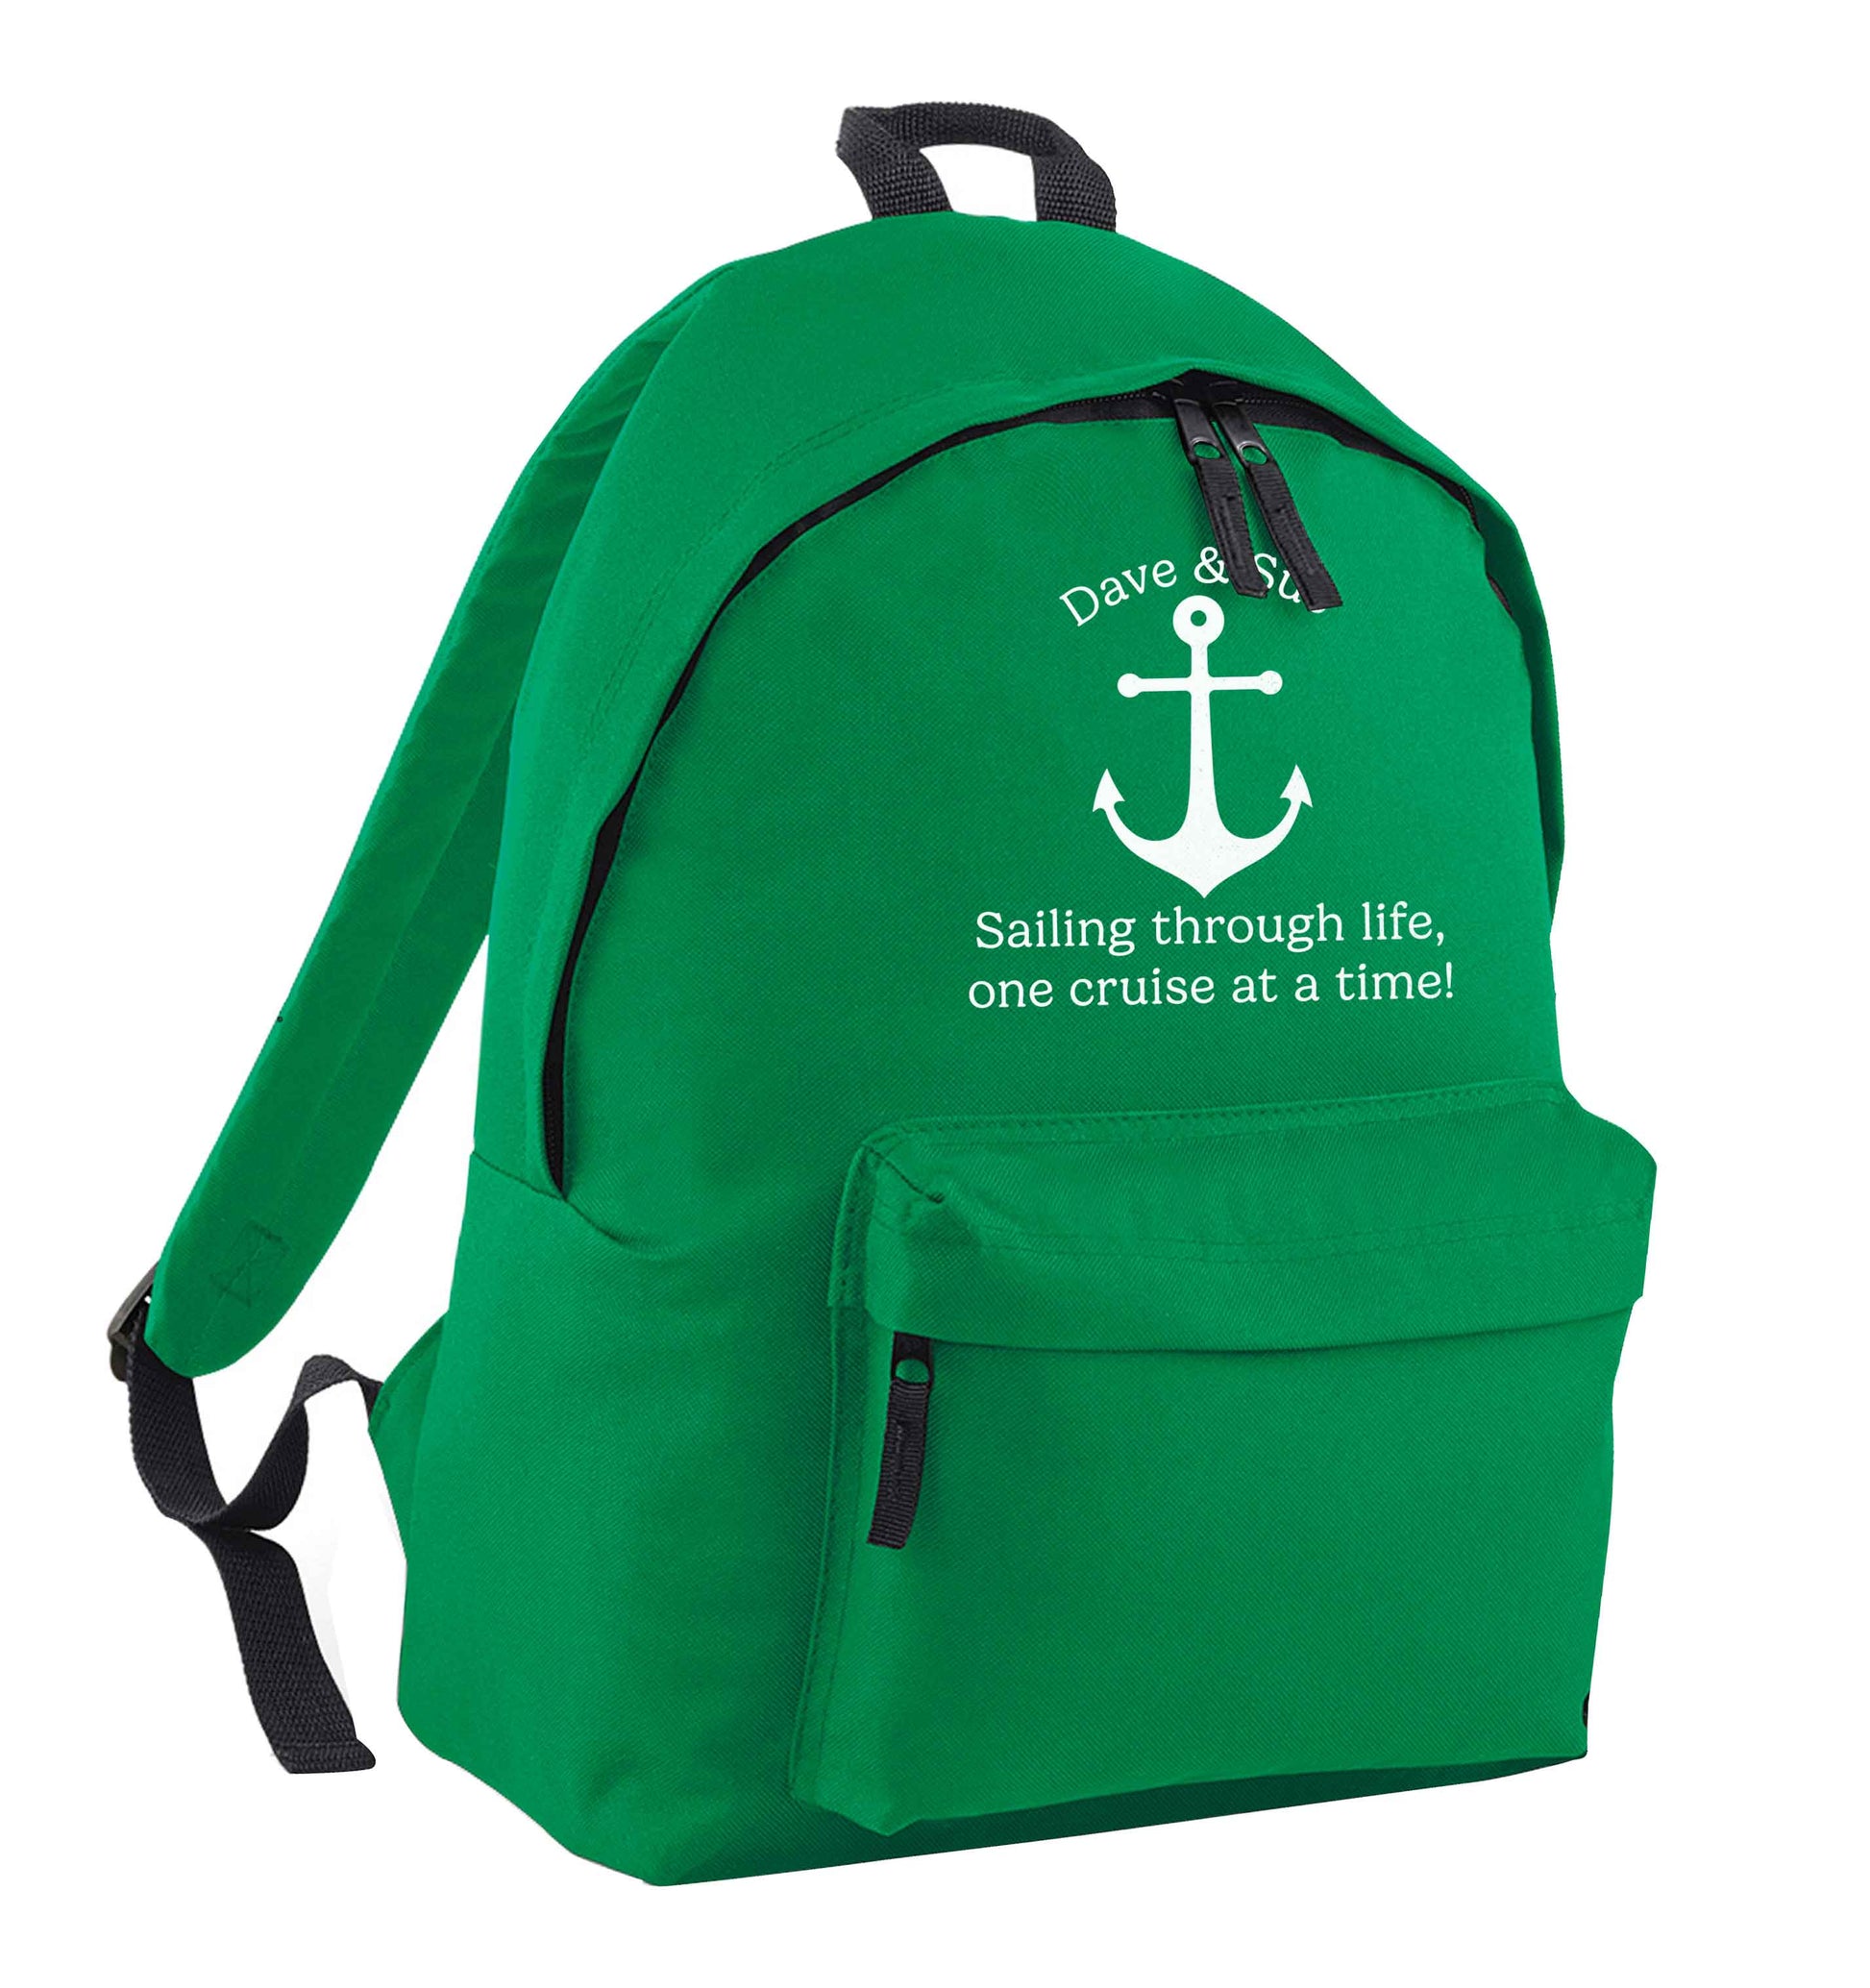 Sailing through life one cruise at a time - personalised green adults backpack